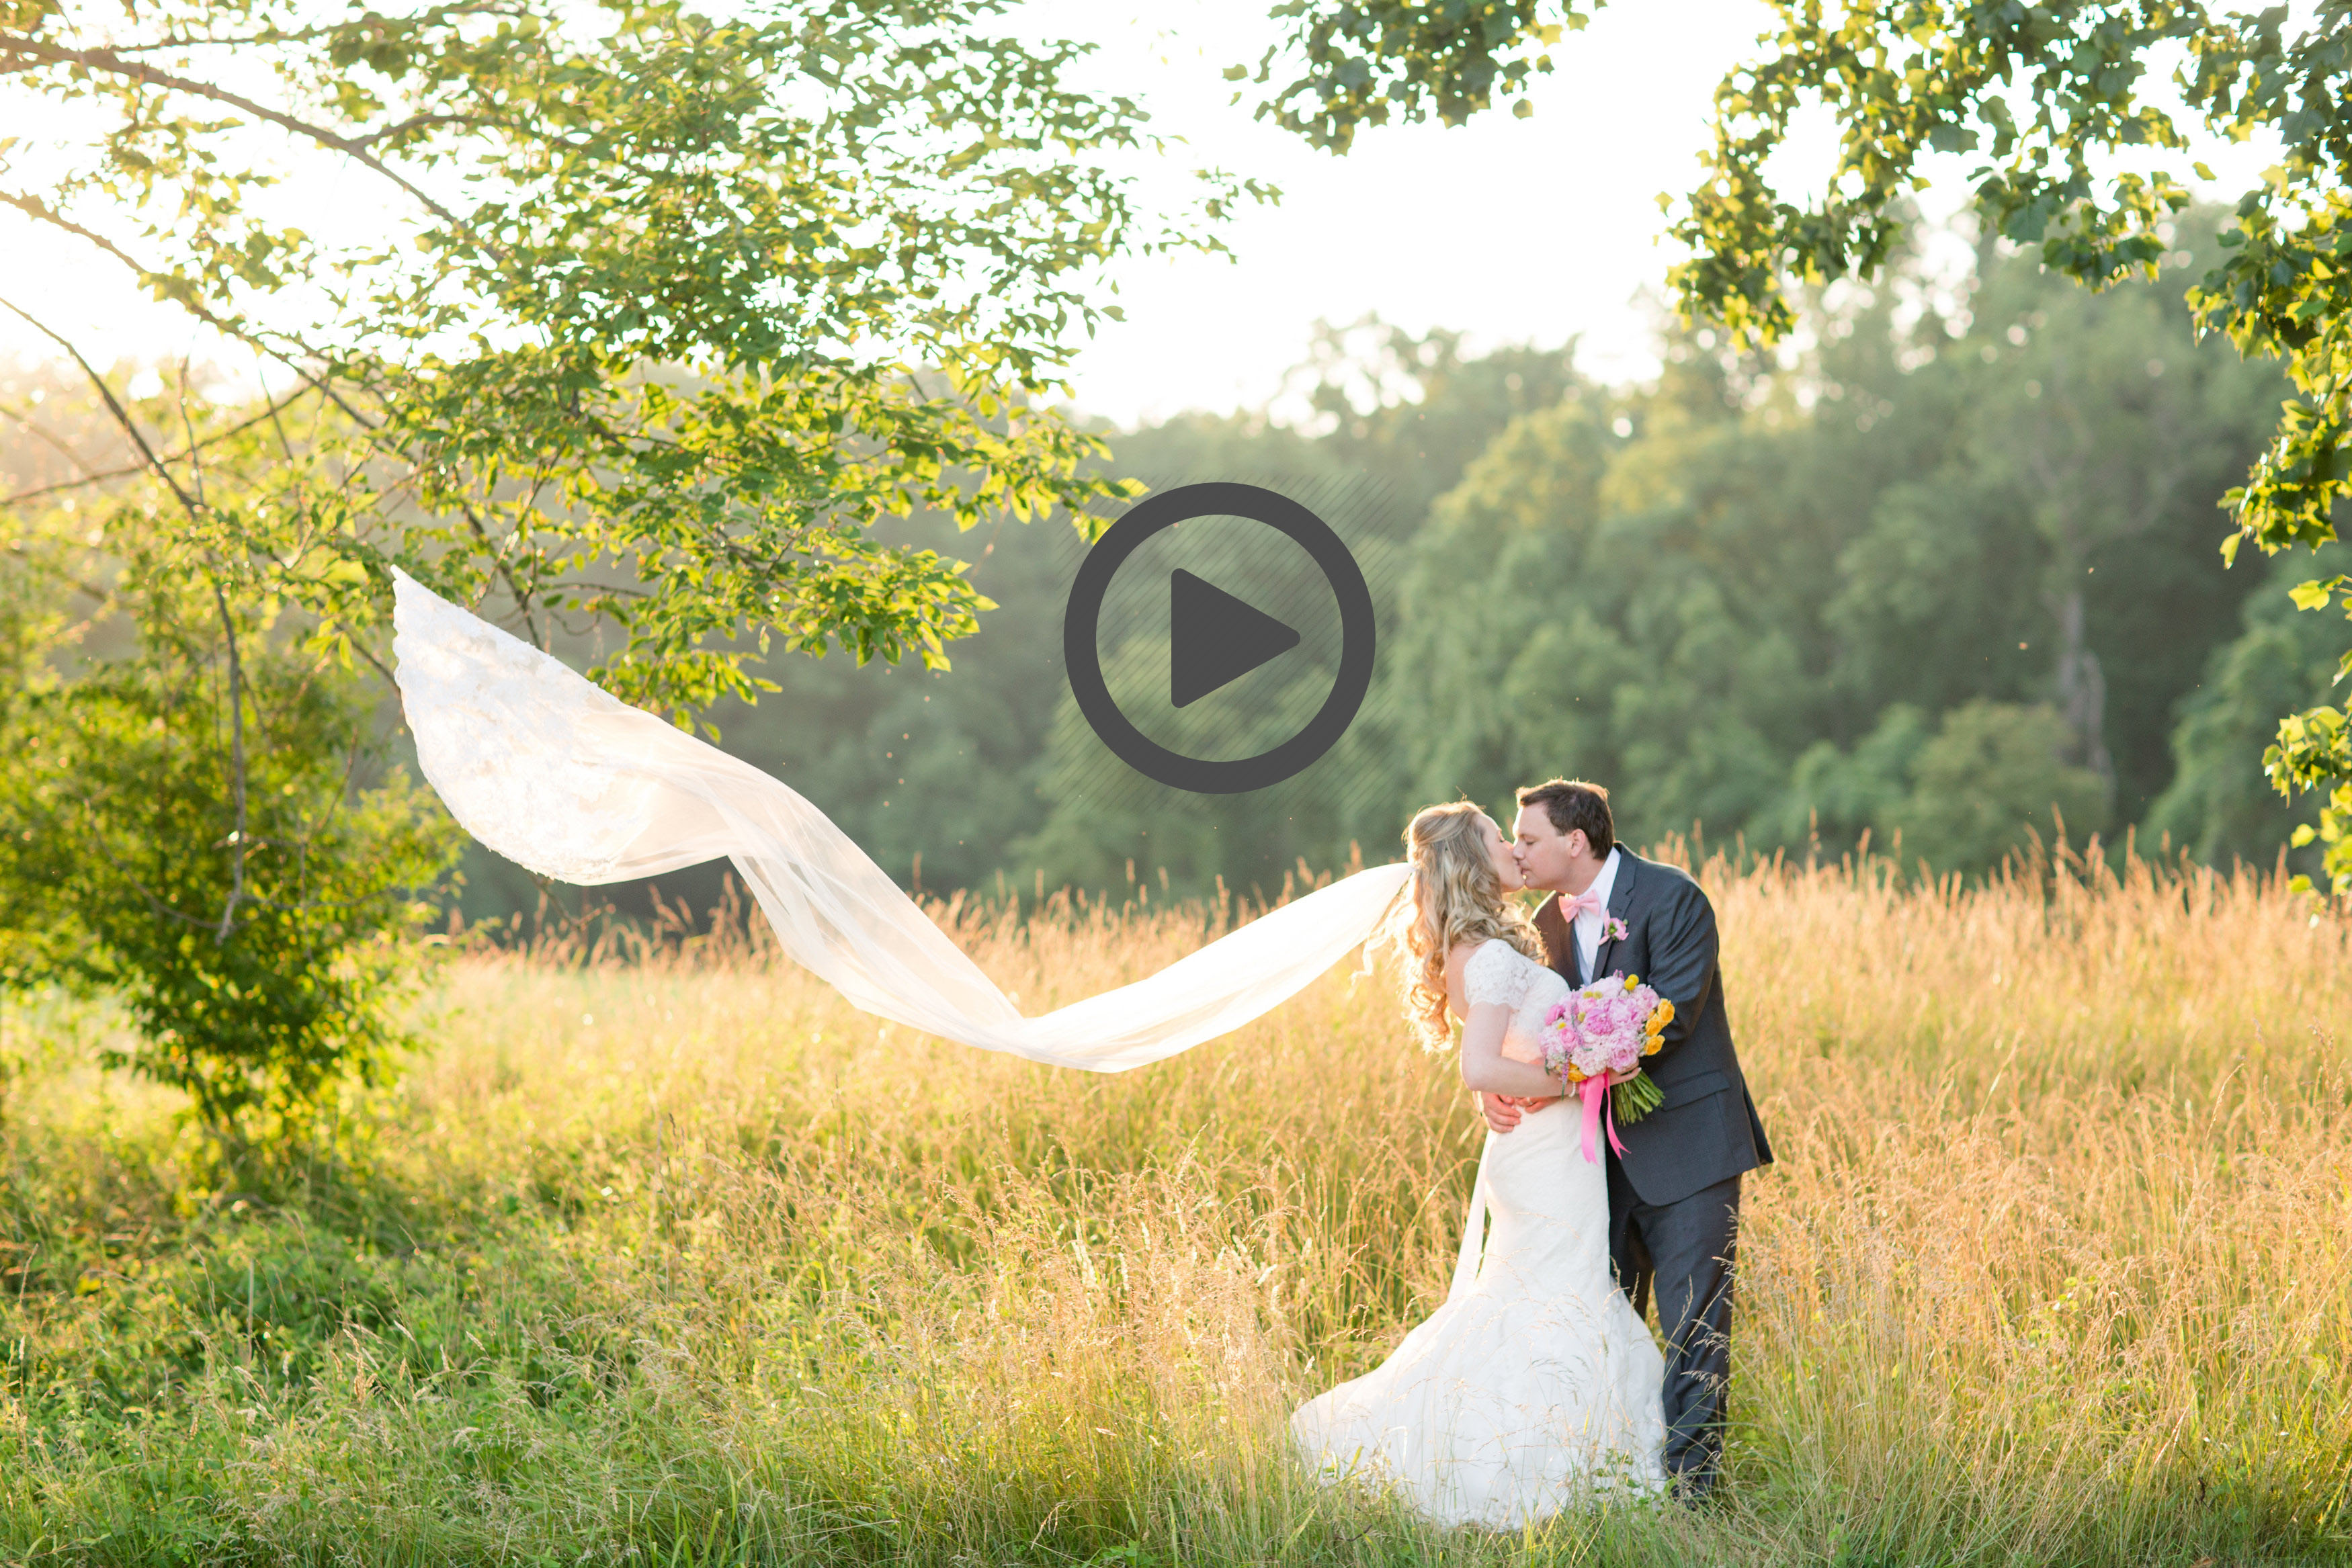 View More: http://katelynjames.pass.us/justin-and-brooke-wedding